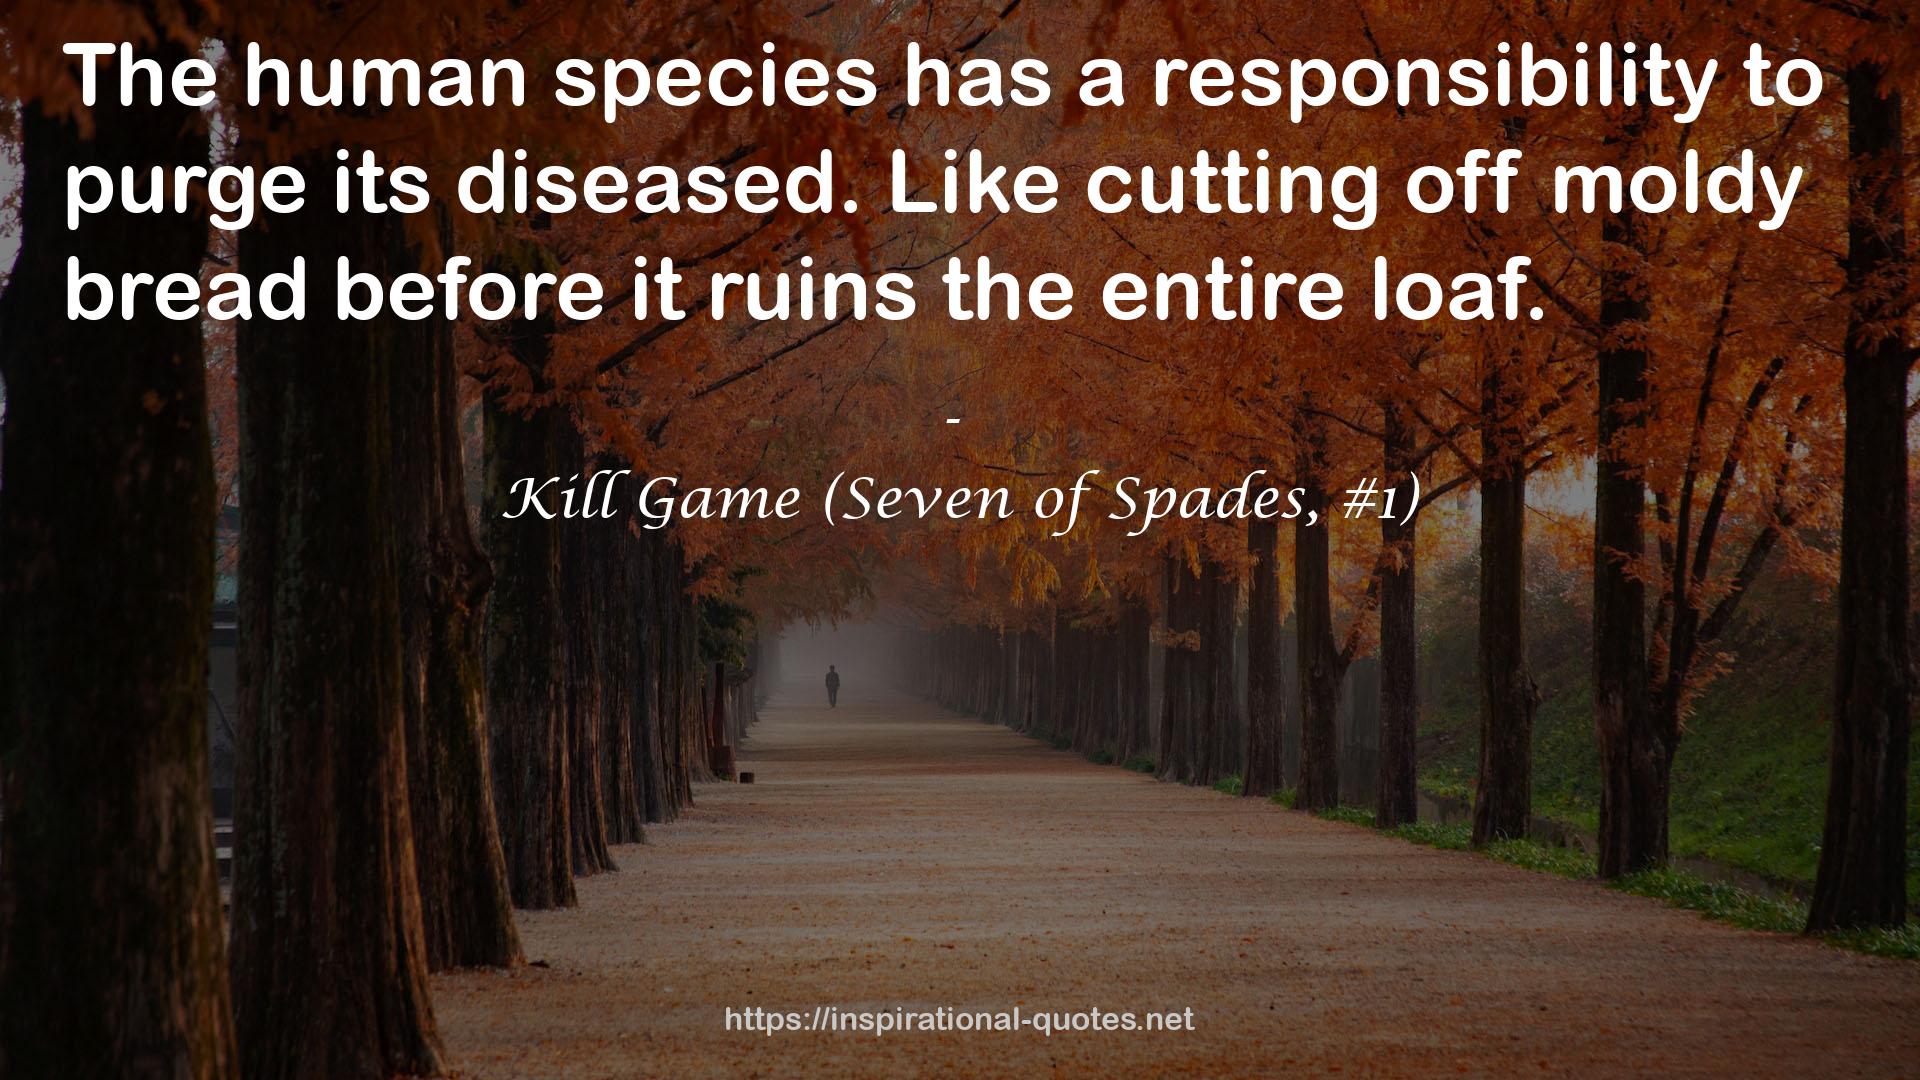 Kill Game (Seven of Spades, #1) QUOTES